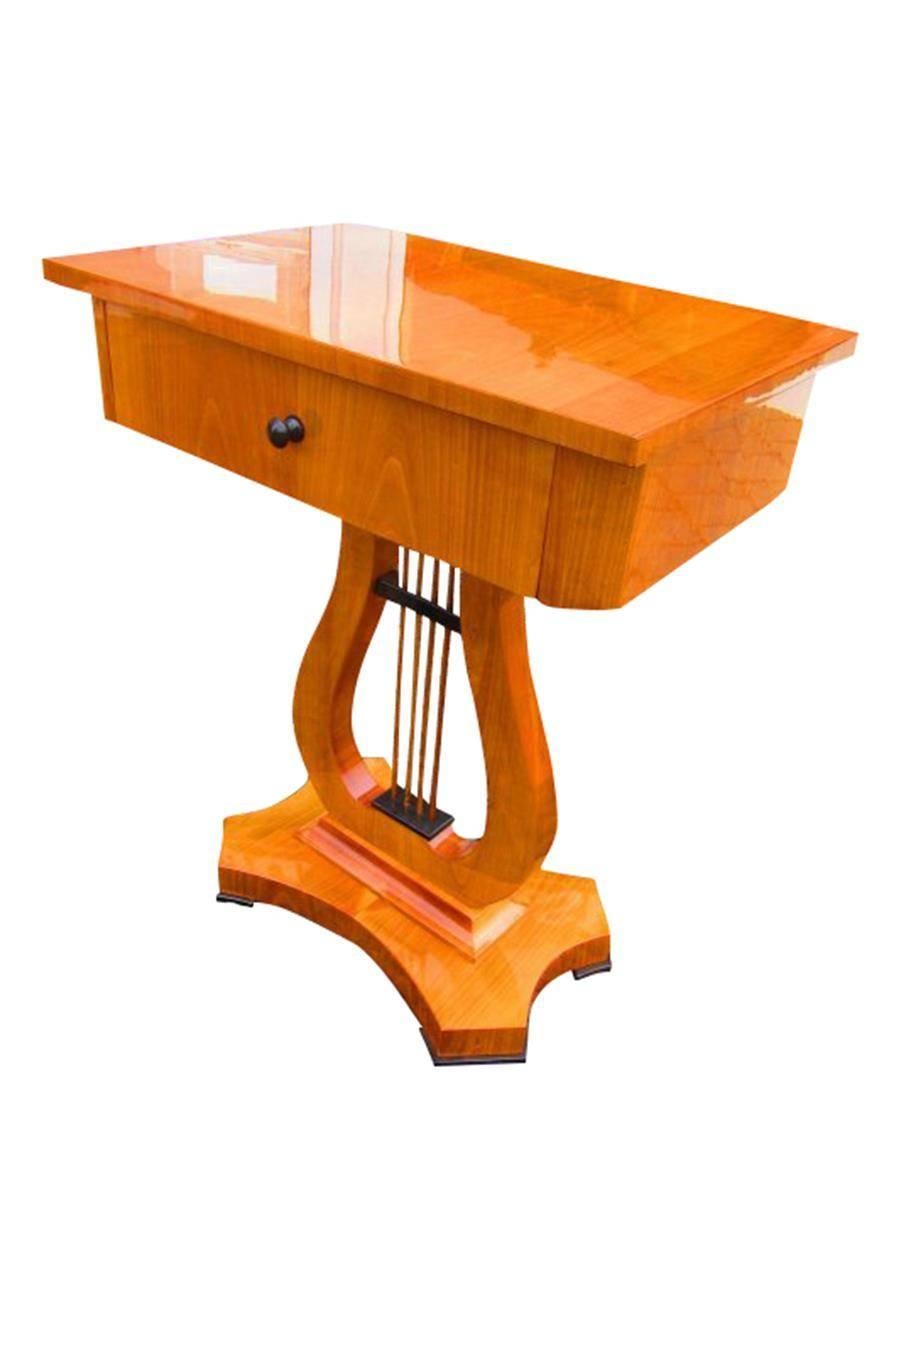 This artful sewing table with Biedermeier design consists of massive cherry tree wood. The surface is high gloss polished and in a excellent condition.

- elegant design with fine details and a front drawer
- perfect reproduction after original